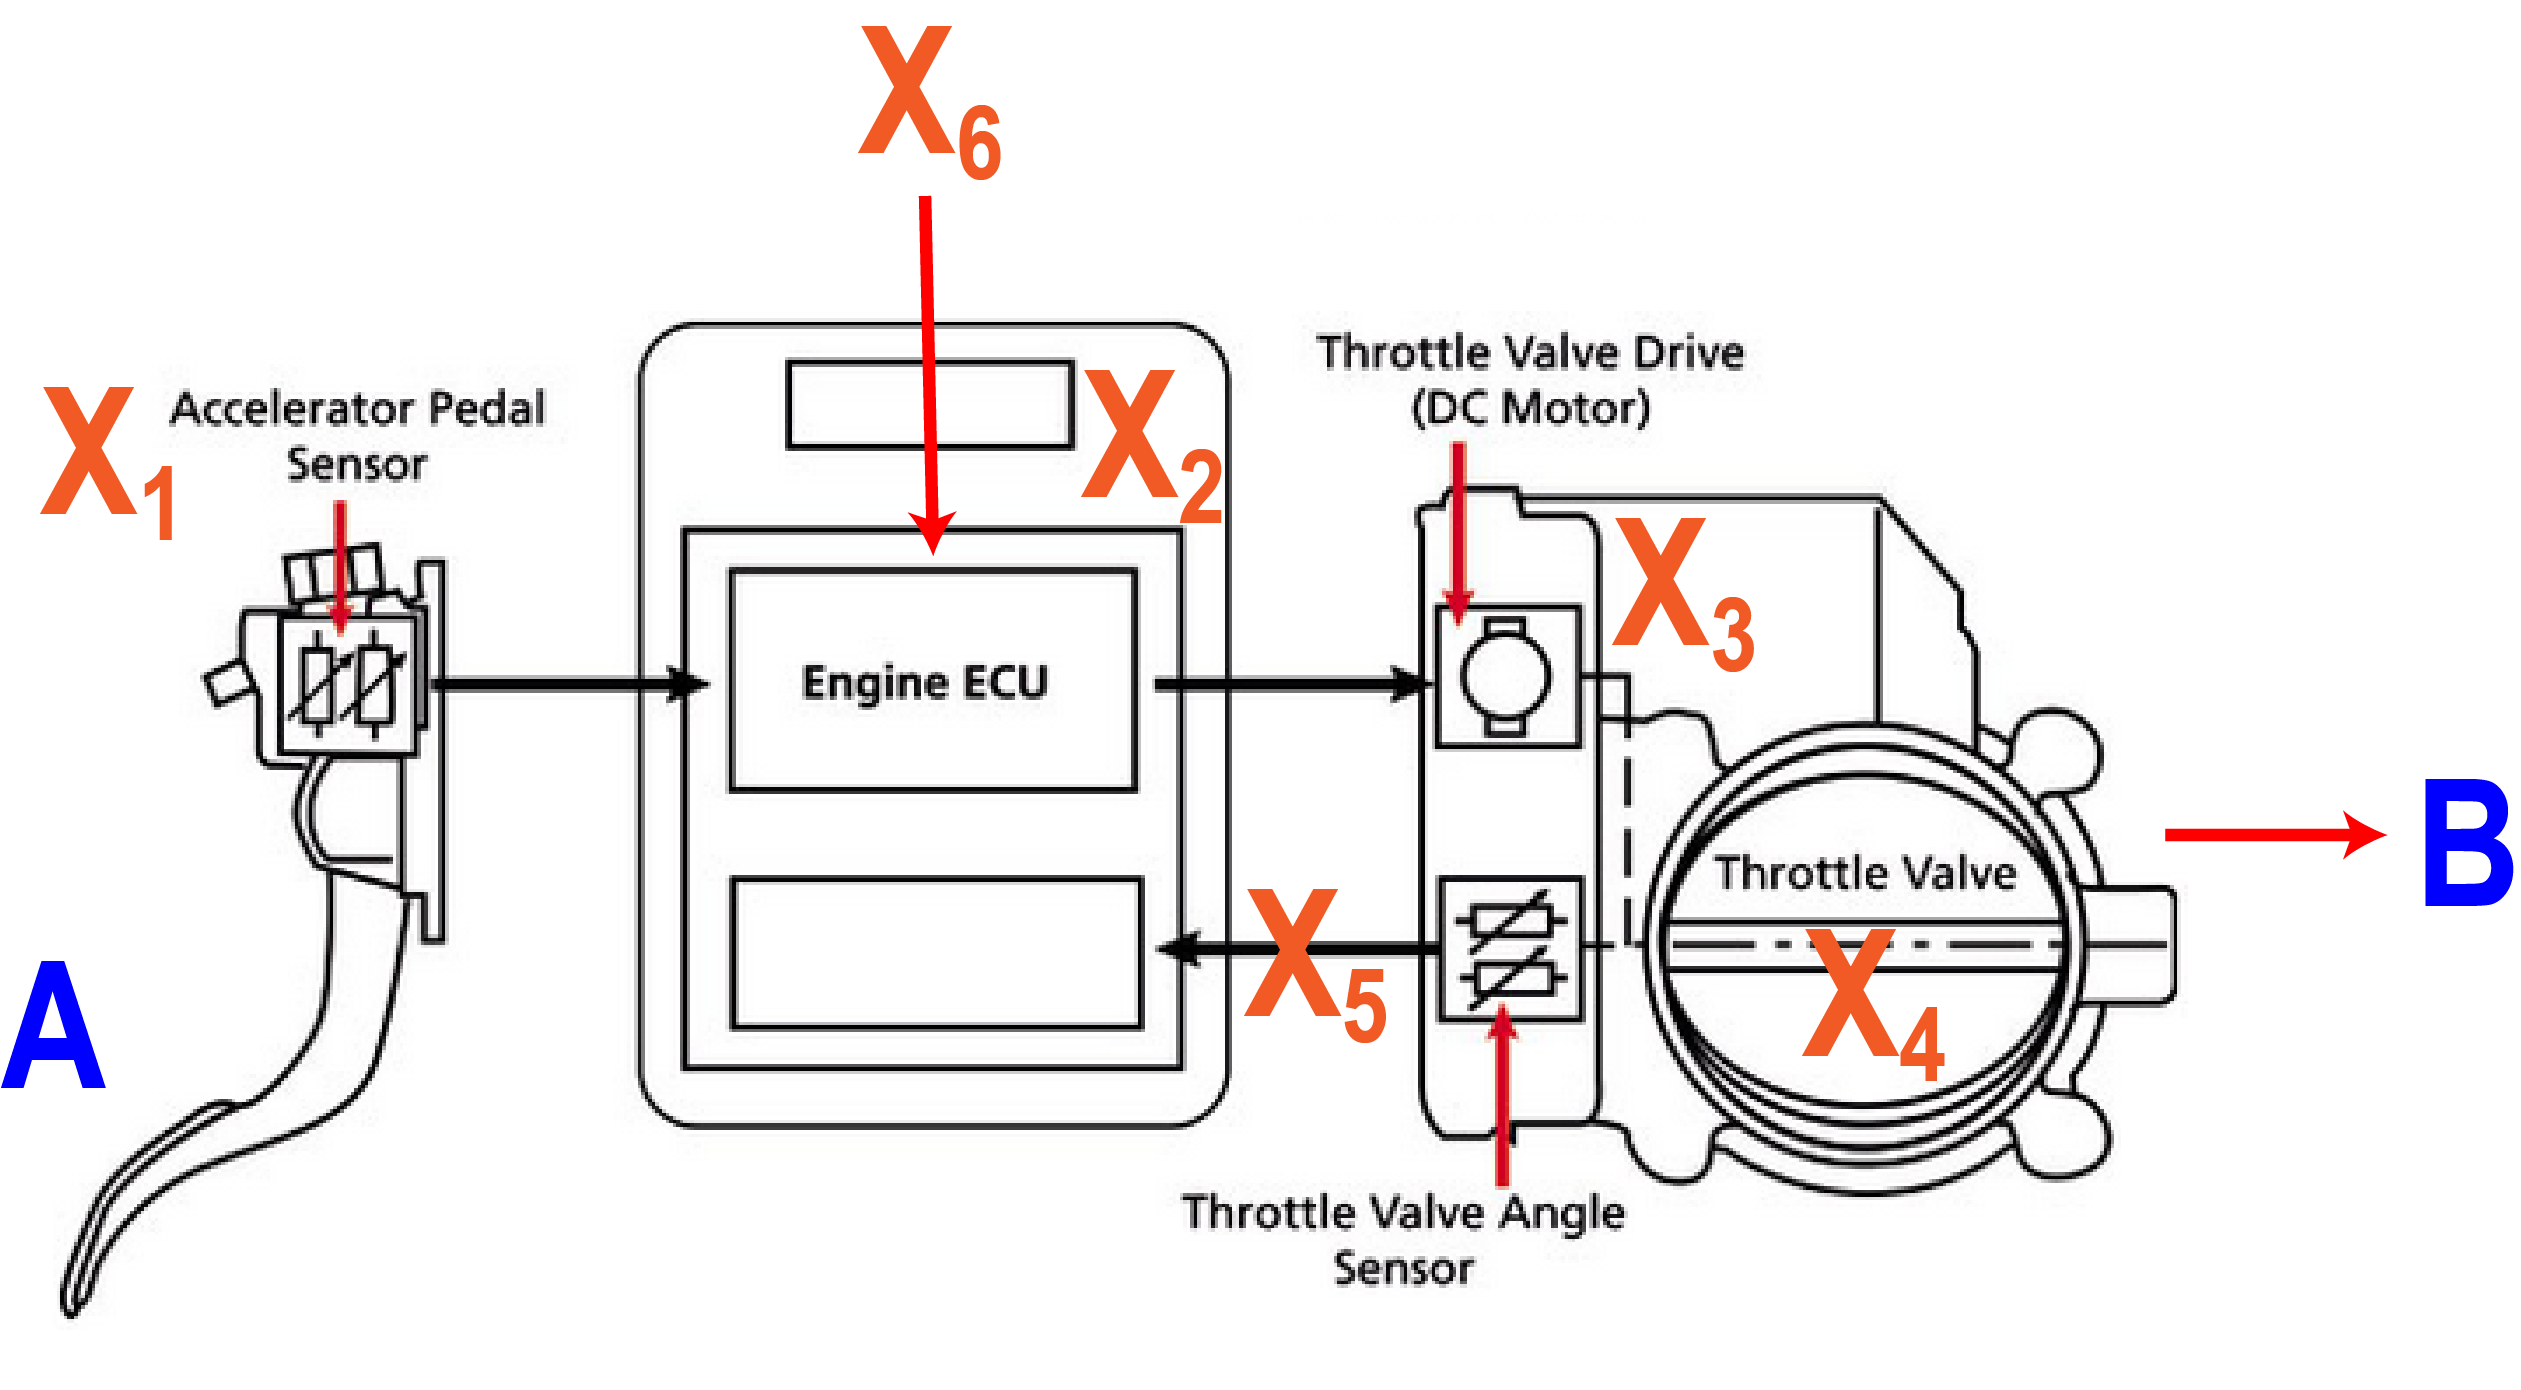 A modified version of the throttle schematic, adding a new component X6, a cruise control input. This demonstrates a collider configuration.